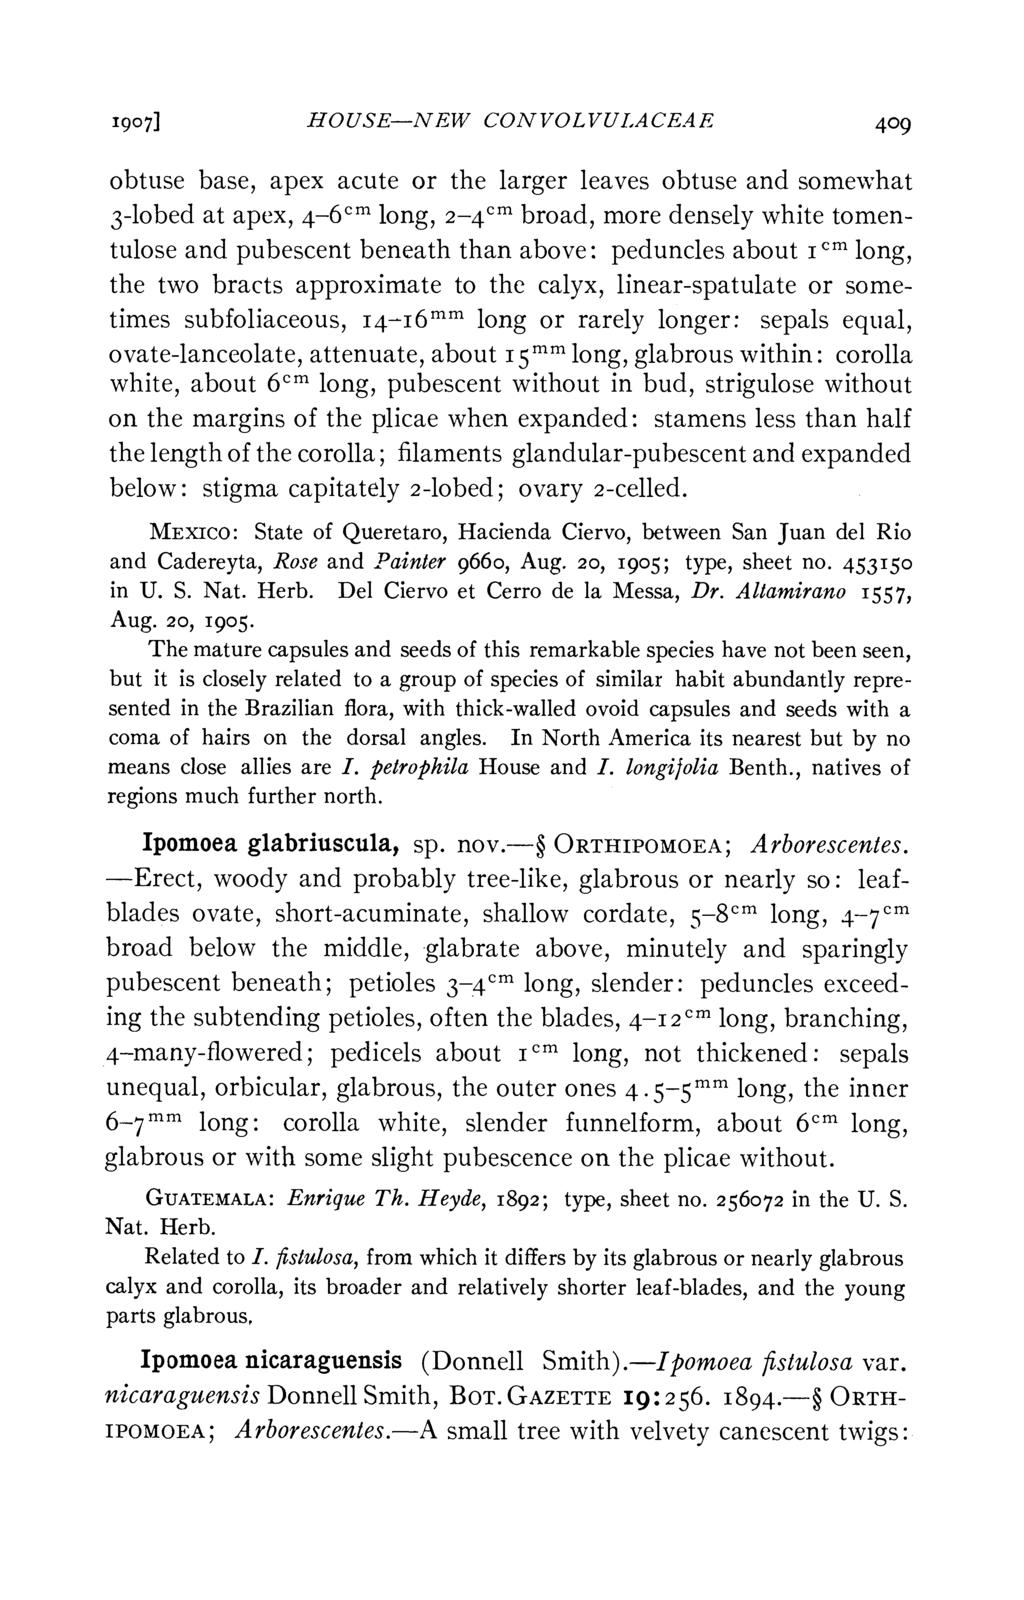 1907] HOUSE-NEW CONVOLVULACEAE 409 obtuse base, apex acute or the larger leaves obtuse and somewhat 3-lobed at apex, 4-61m long, 2-4cm broad, more densely white tomentulose and pubescent beneath than